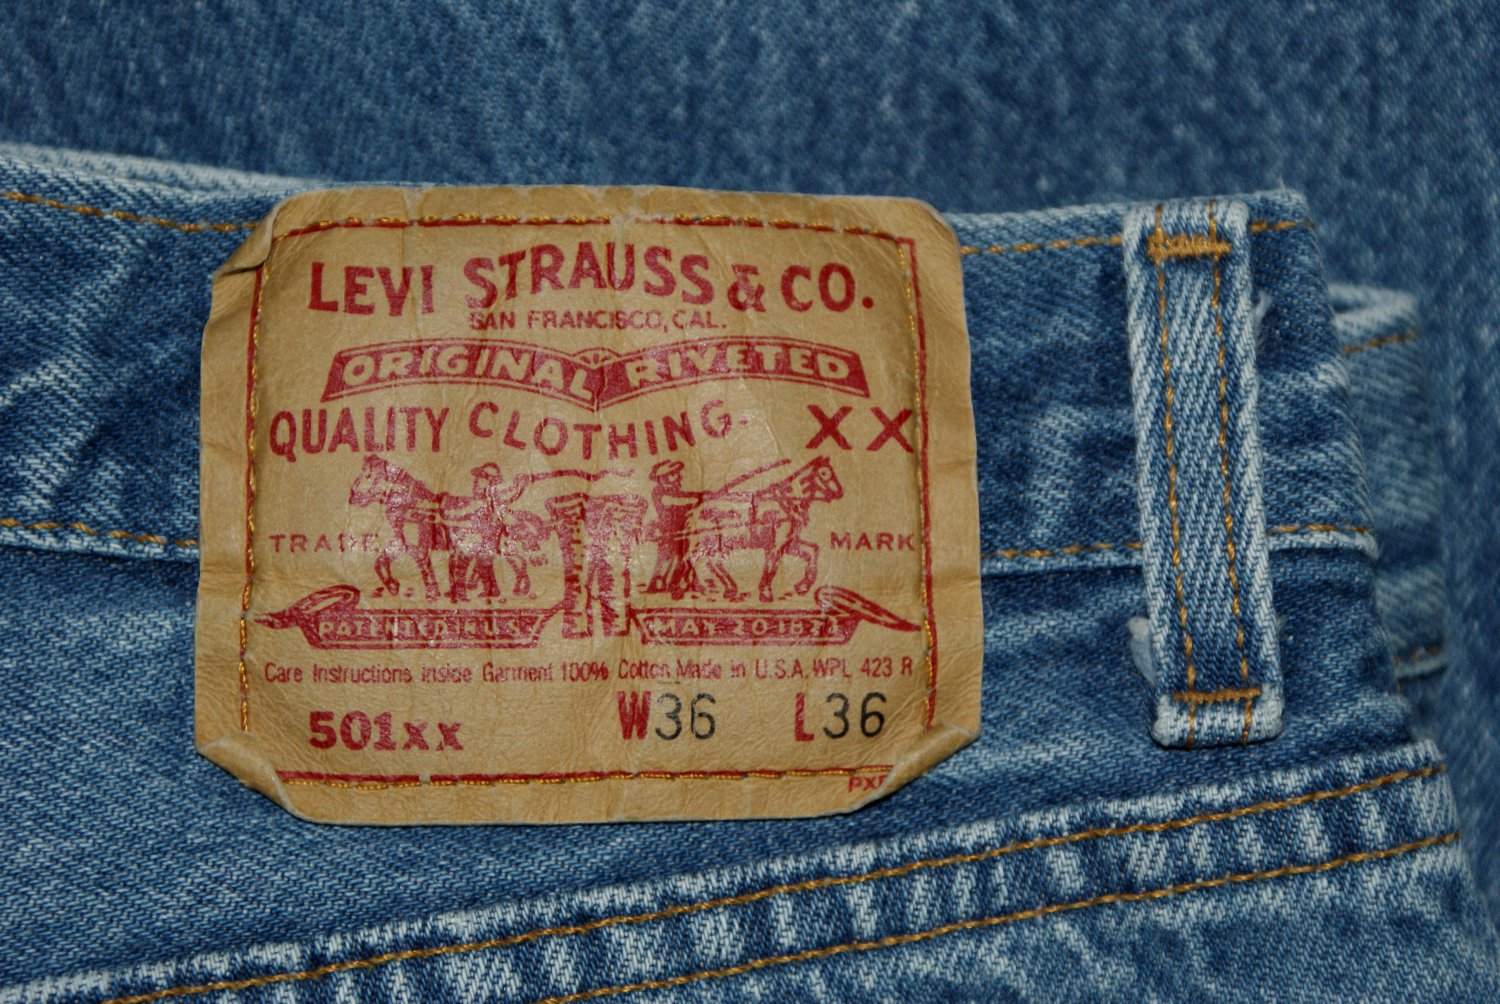 VINTAGE 1992 LEVI'S 501 xx CLASSIC BLUE DENIM JEANS - Made in USA - W36 ...